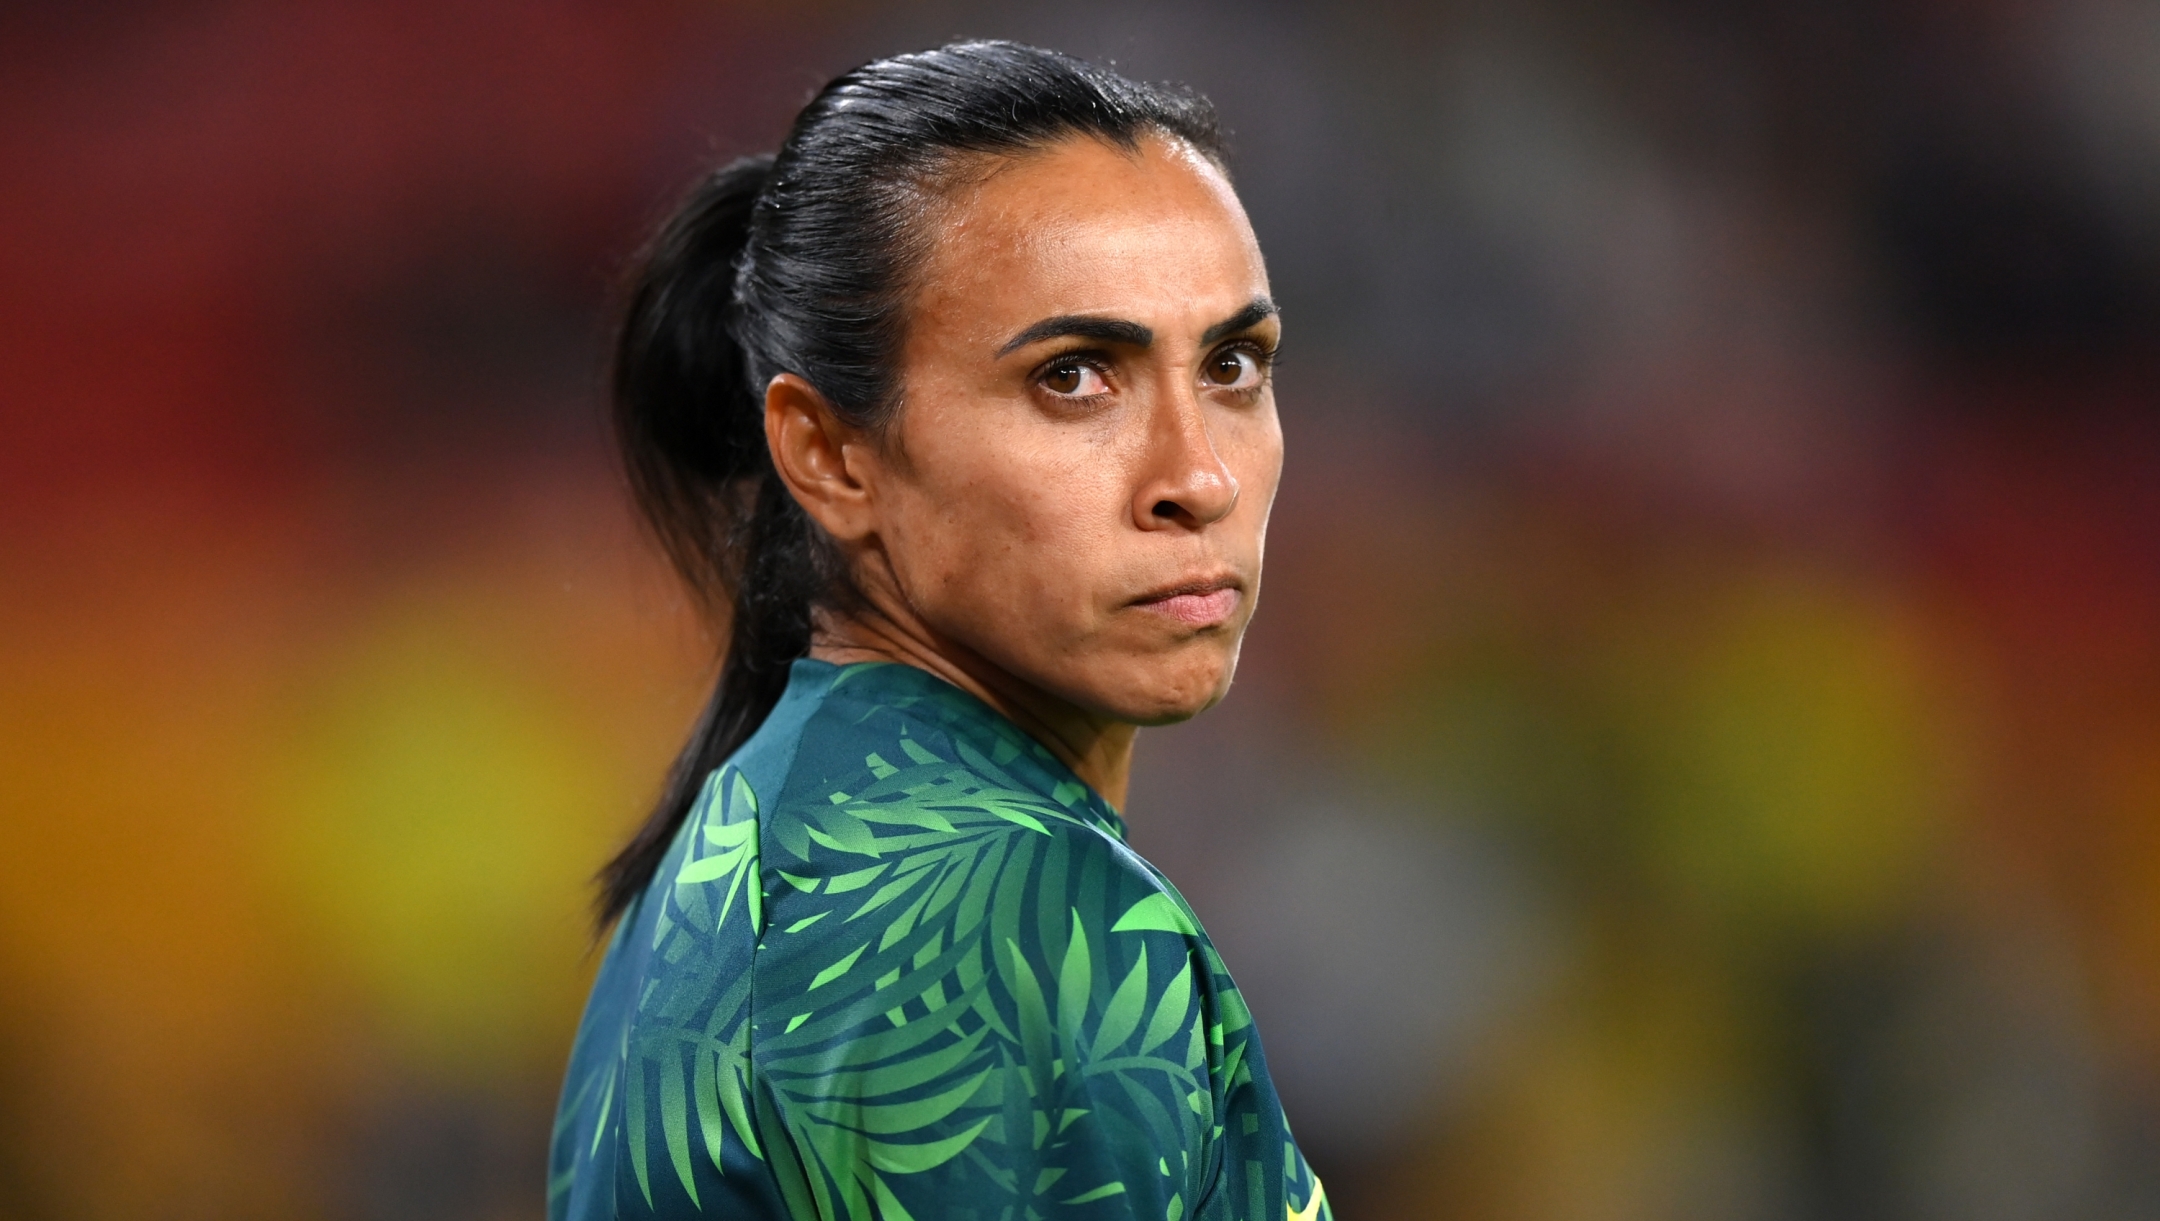 BRISBANE, AUSTRALIA - JULY 29: Marta of Brazil is seen during the warm up prior to the FIFA Women's World Cup Australia & New Zealand 2023 Group F match between France and Brazil at Brisbane Stadium on July 29, 2023 in Brisbane, Australia. (Photo by Justin Setterfield/Getty Images)